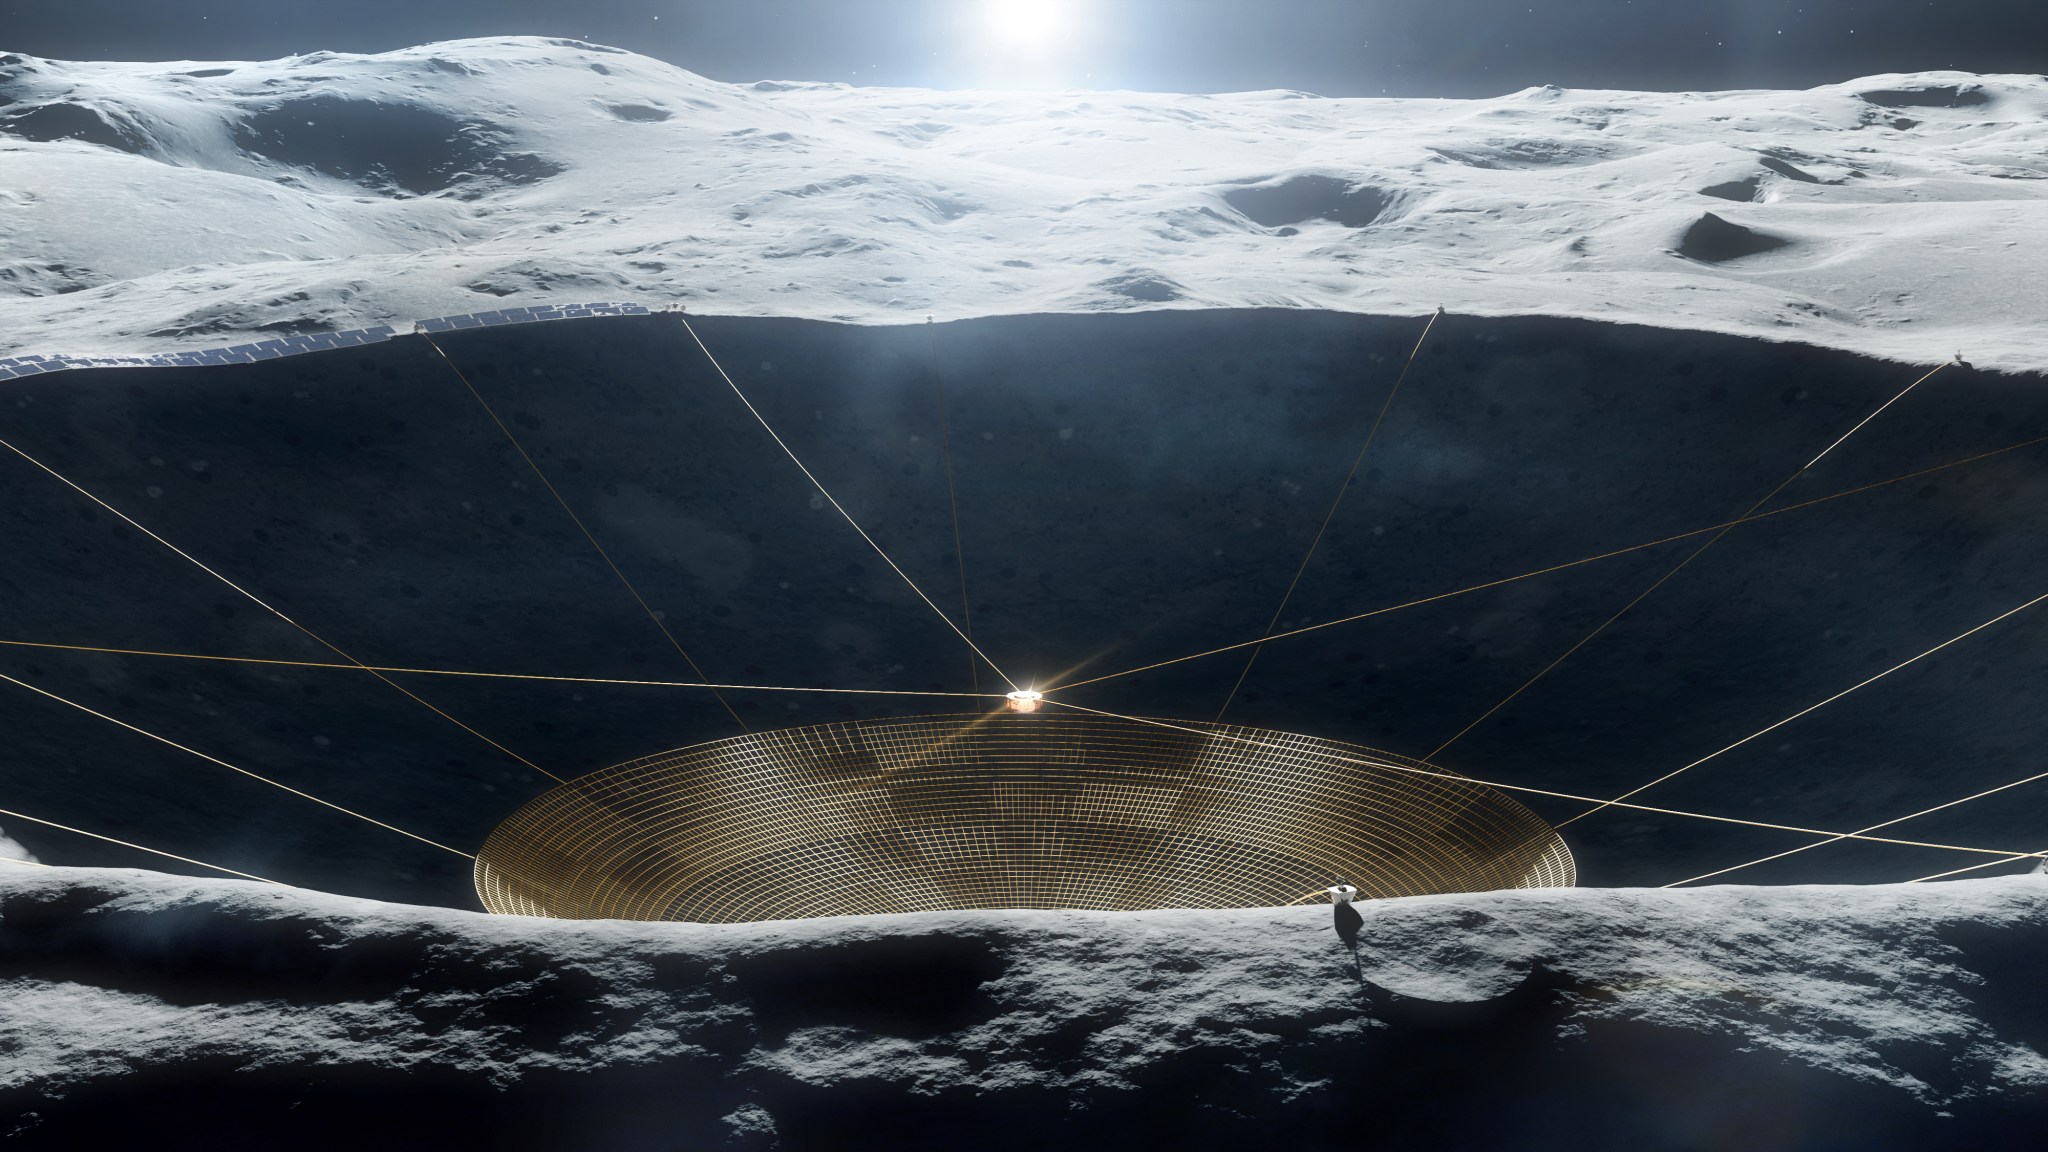 Illustration of a conceptual radio telescope within a crater on the Moon.